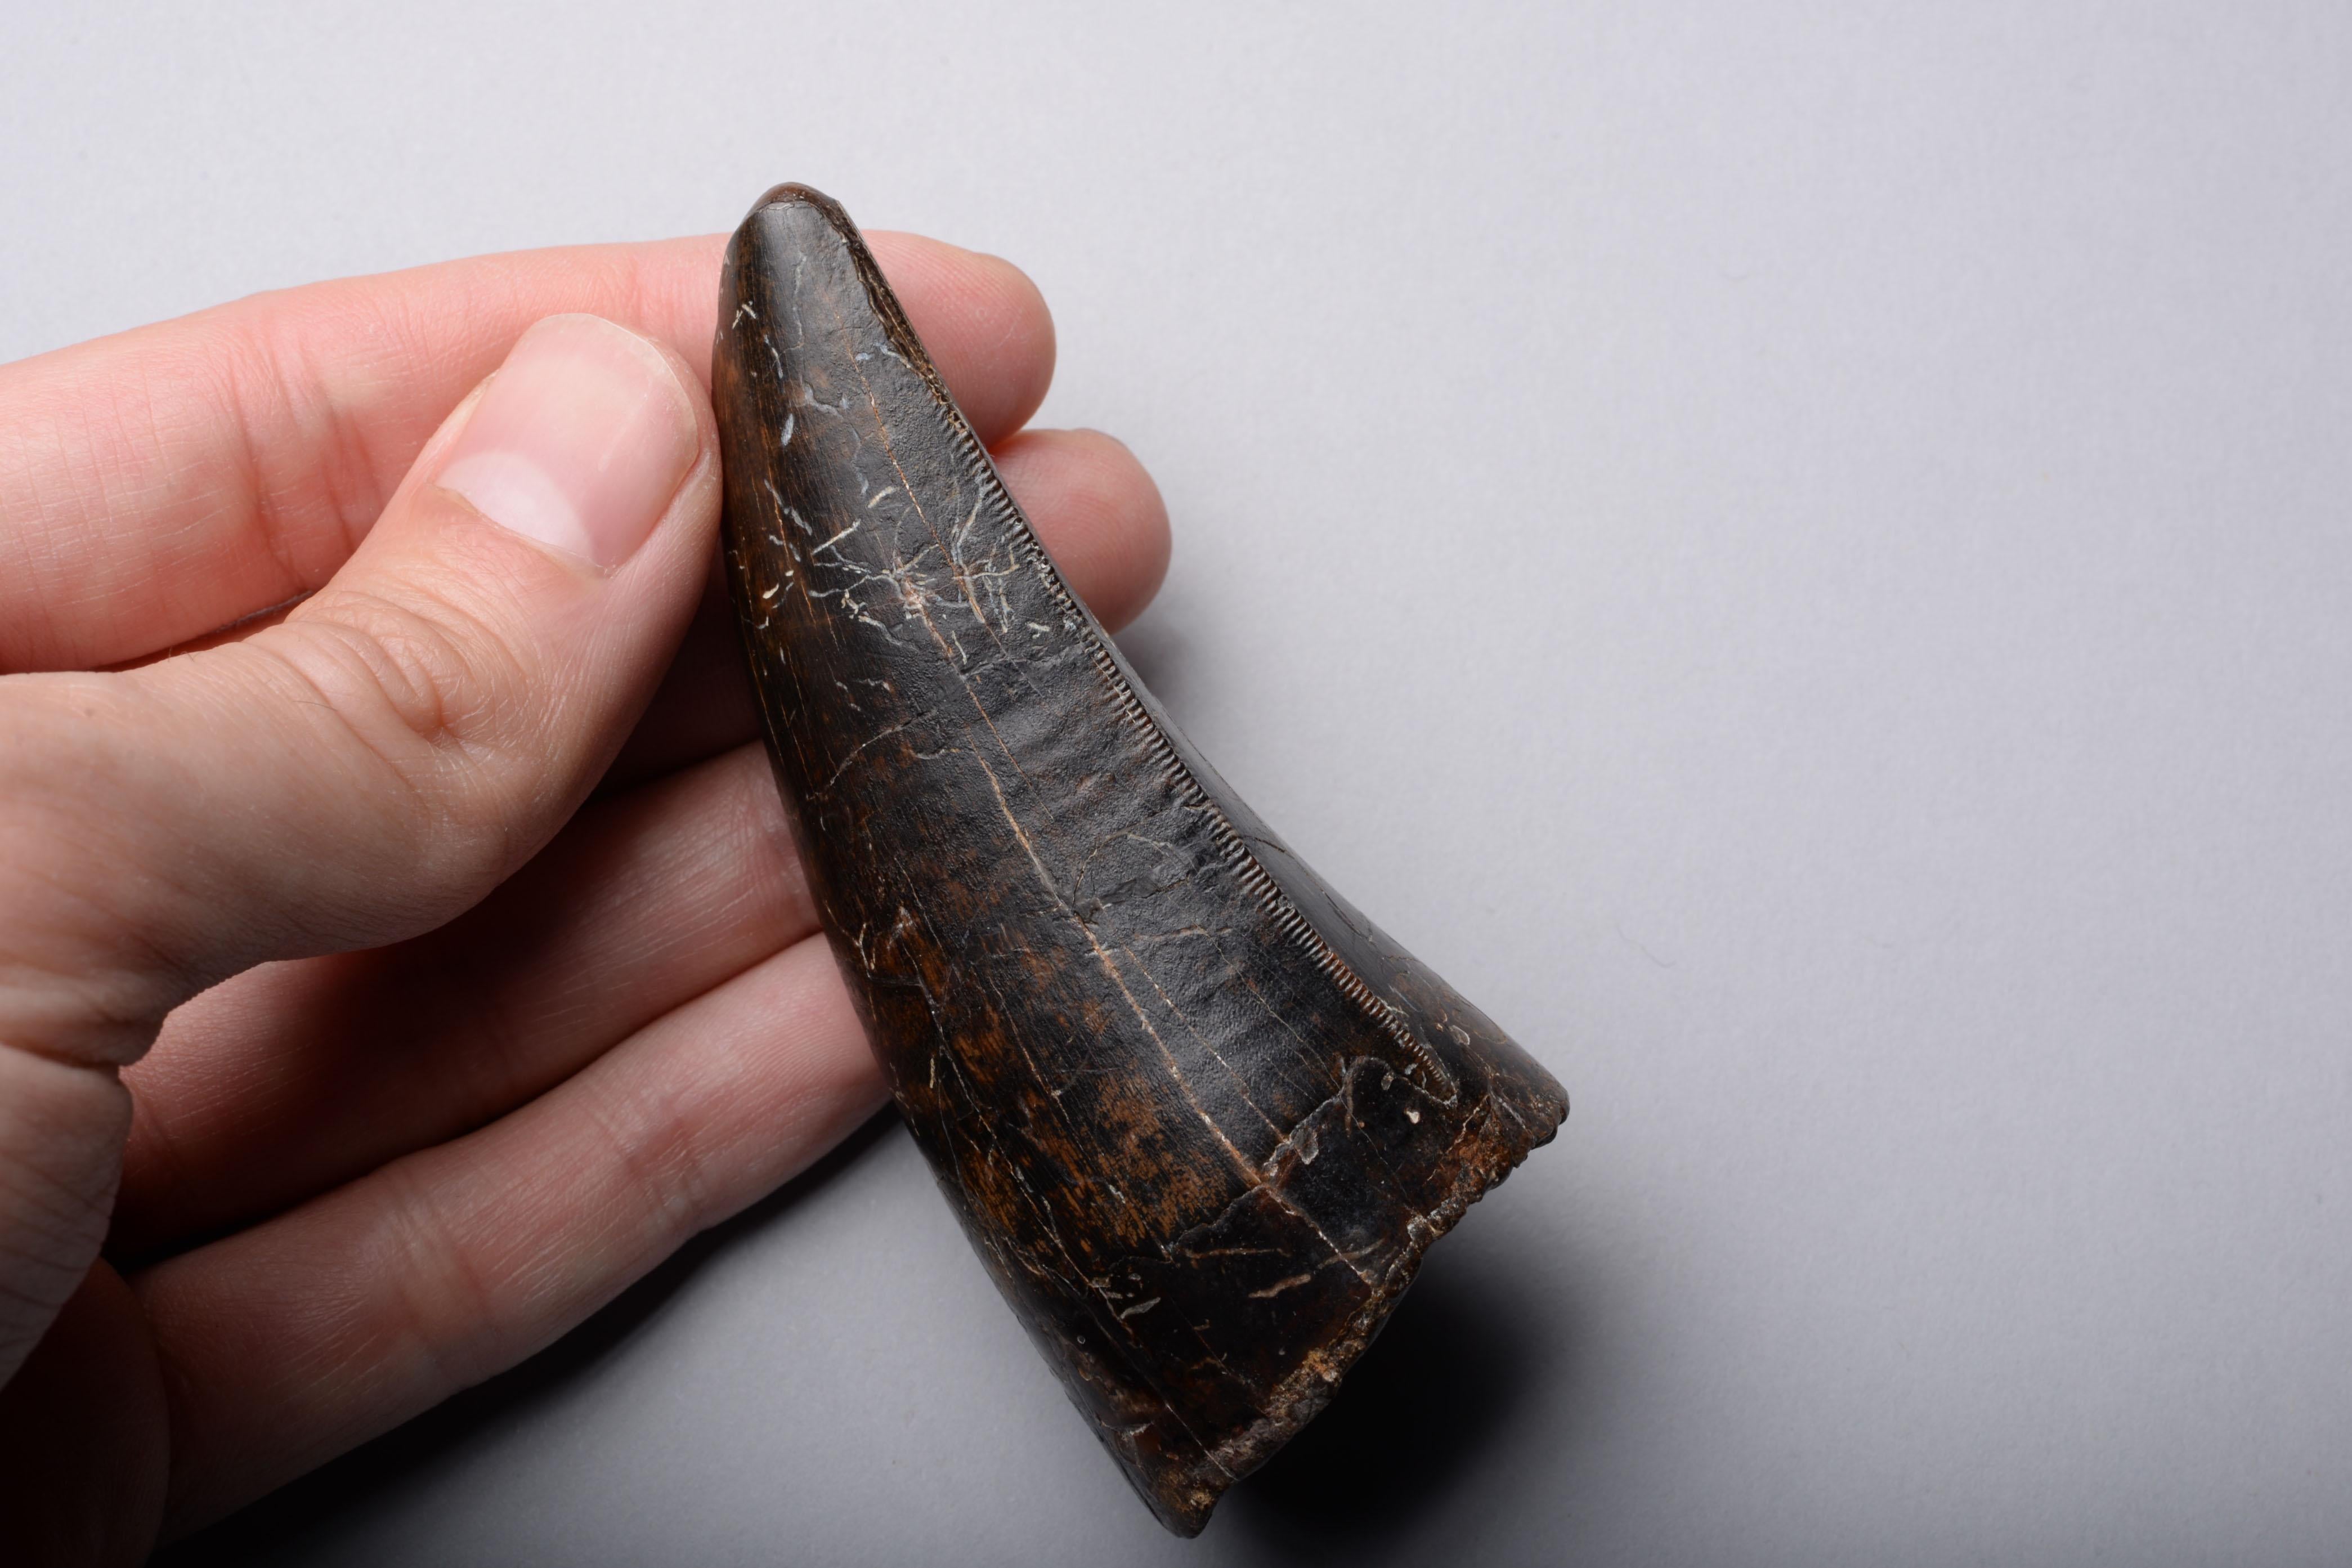 The tooth of an adult Tyrannosaurus Rex, dating to the Late Cretaceous, approximately 67 million years ago.

A large, beautifully preserved maxillary tooth, with magnificent mottled brown-black and caramel coloured enamel, near perfect serrations